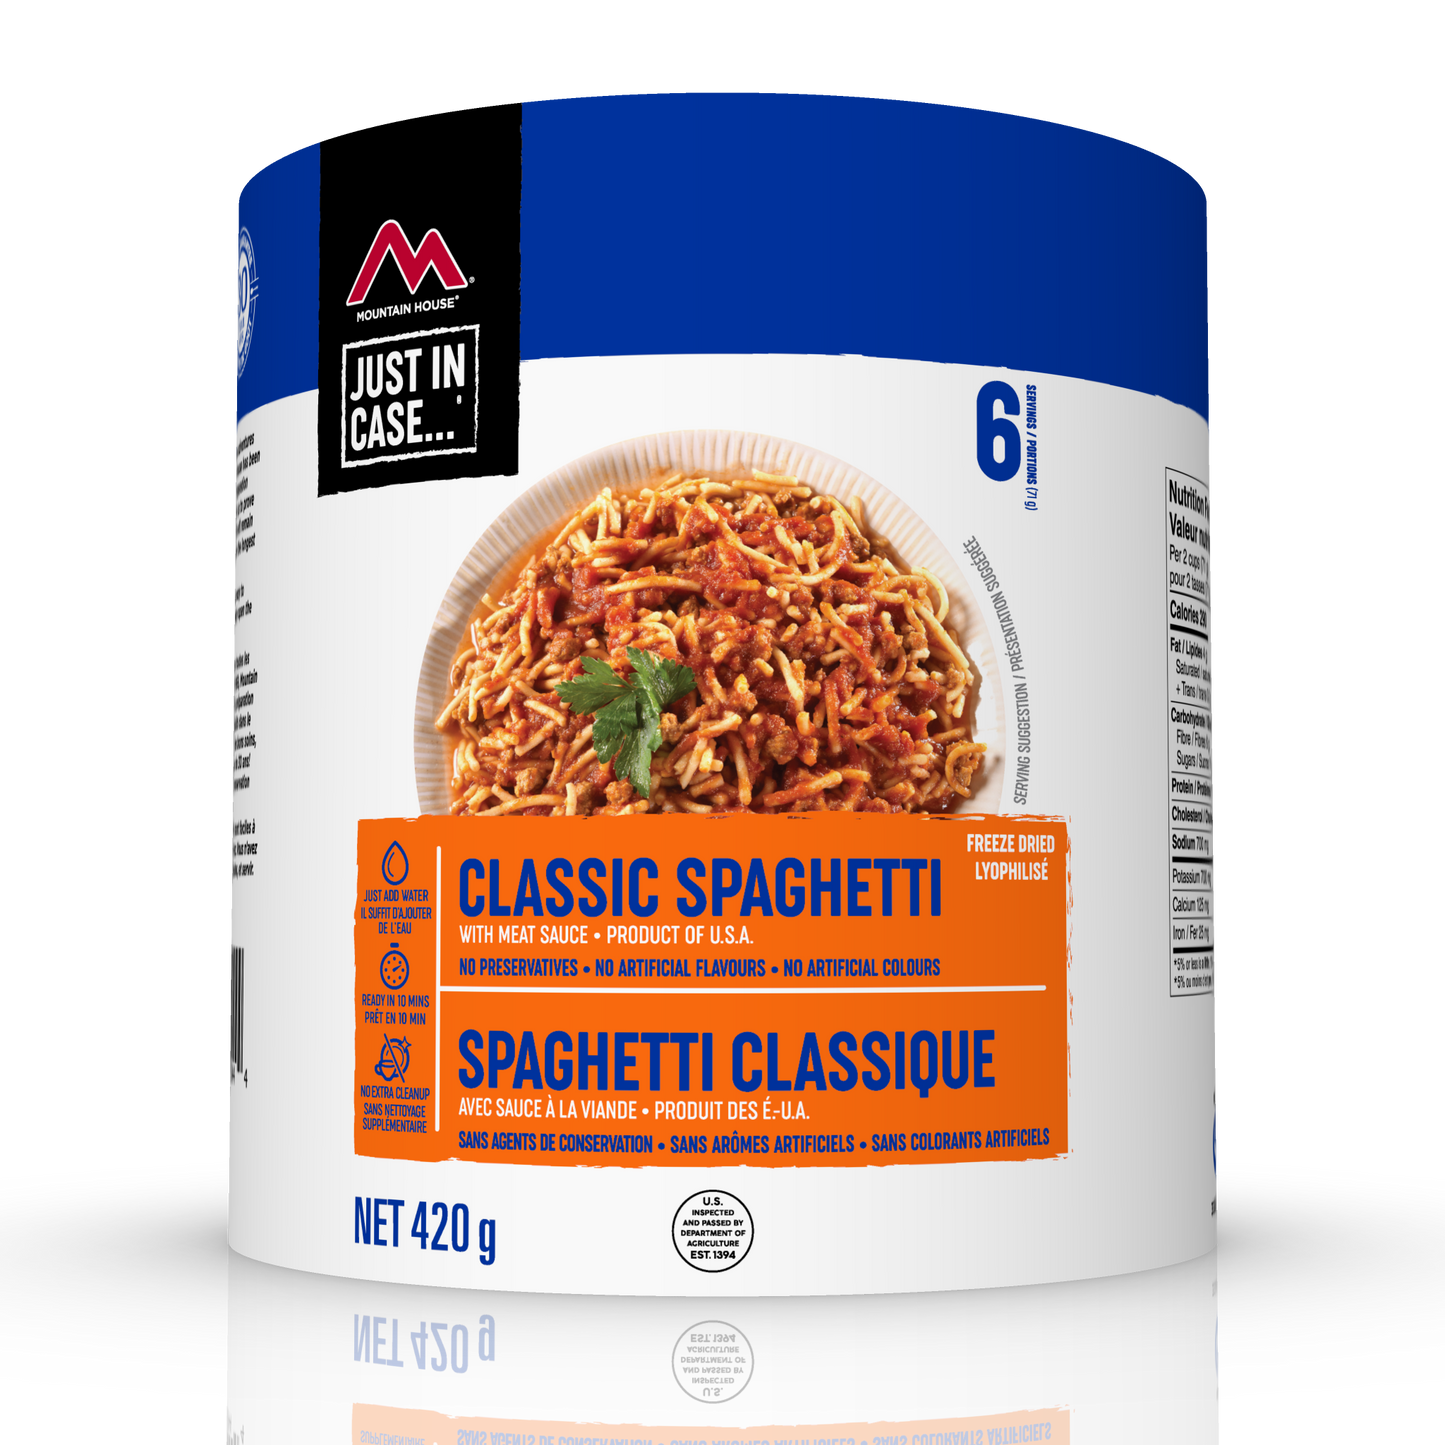 The Mountain House Spaghetti with Meat Sauce #10 Can is made with noodles and beef in Italian-style red sauce. Perfect for emergency food storage.